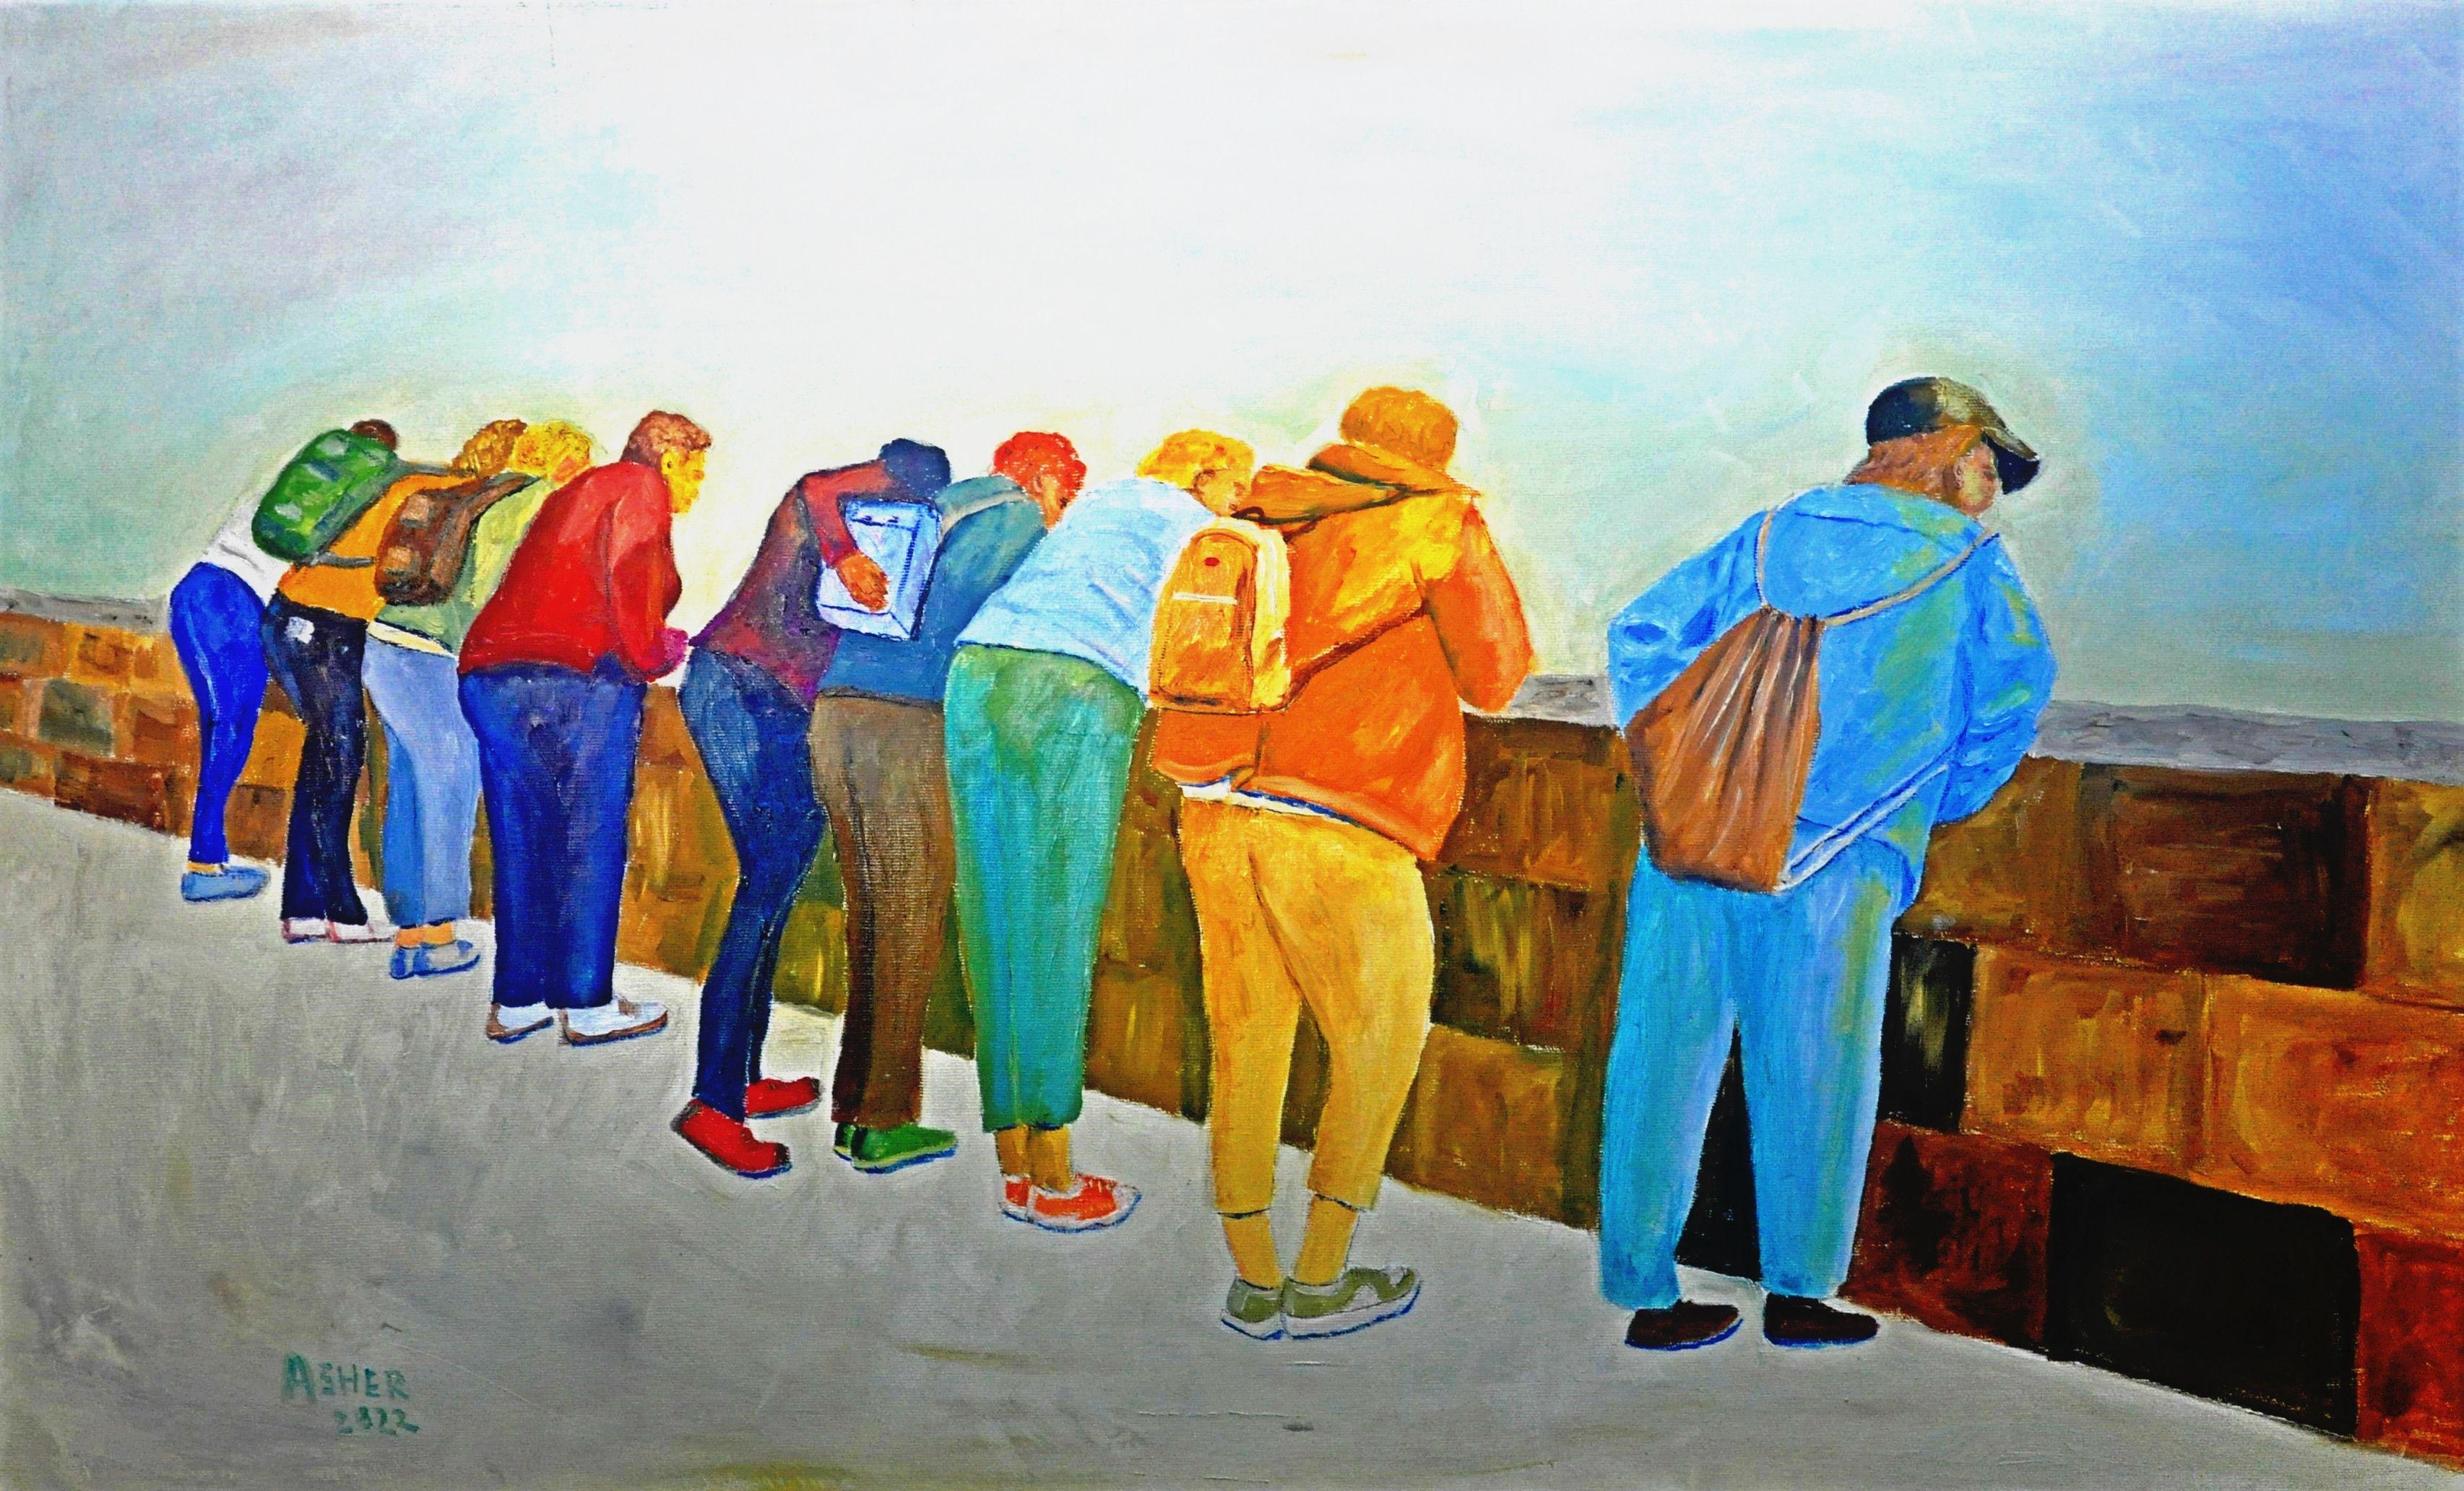 Walking in Prague on the Charles bridge we saw under the bridge a ceremony of the firefighters remembering 9/11 all those women and others were in that position looking down September 2022 :: Painting :: Expressionism :: This piece comes with an